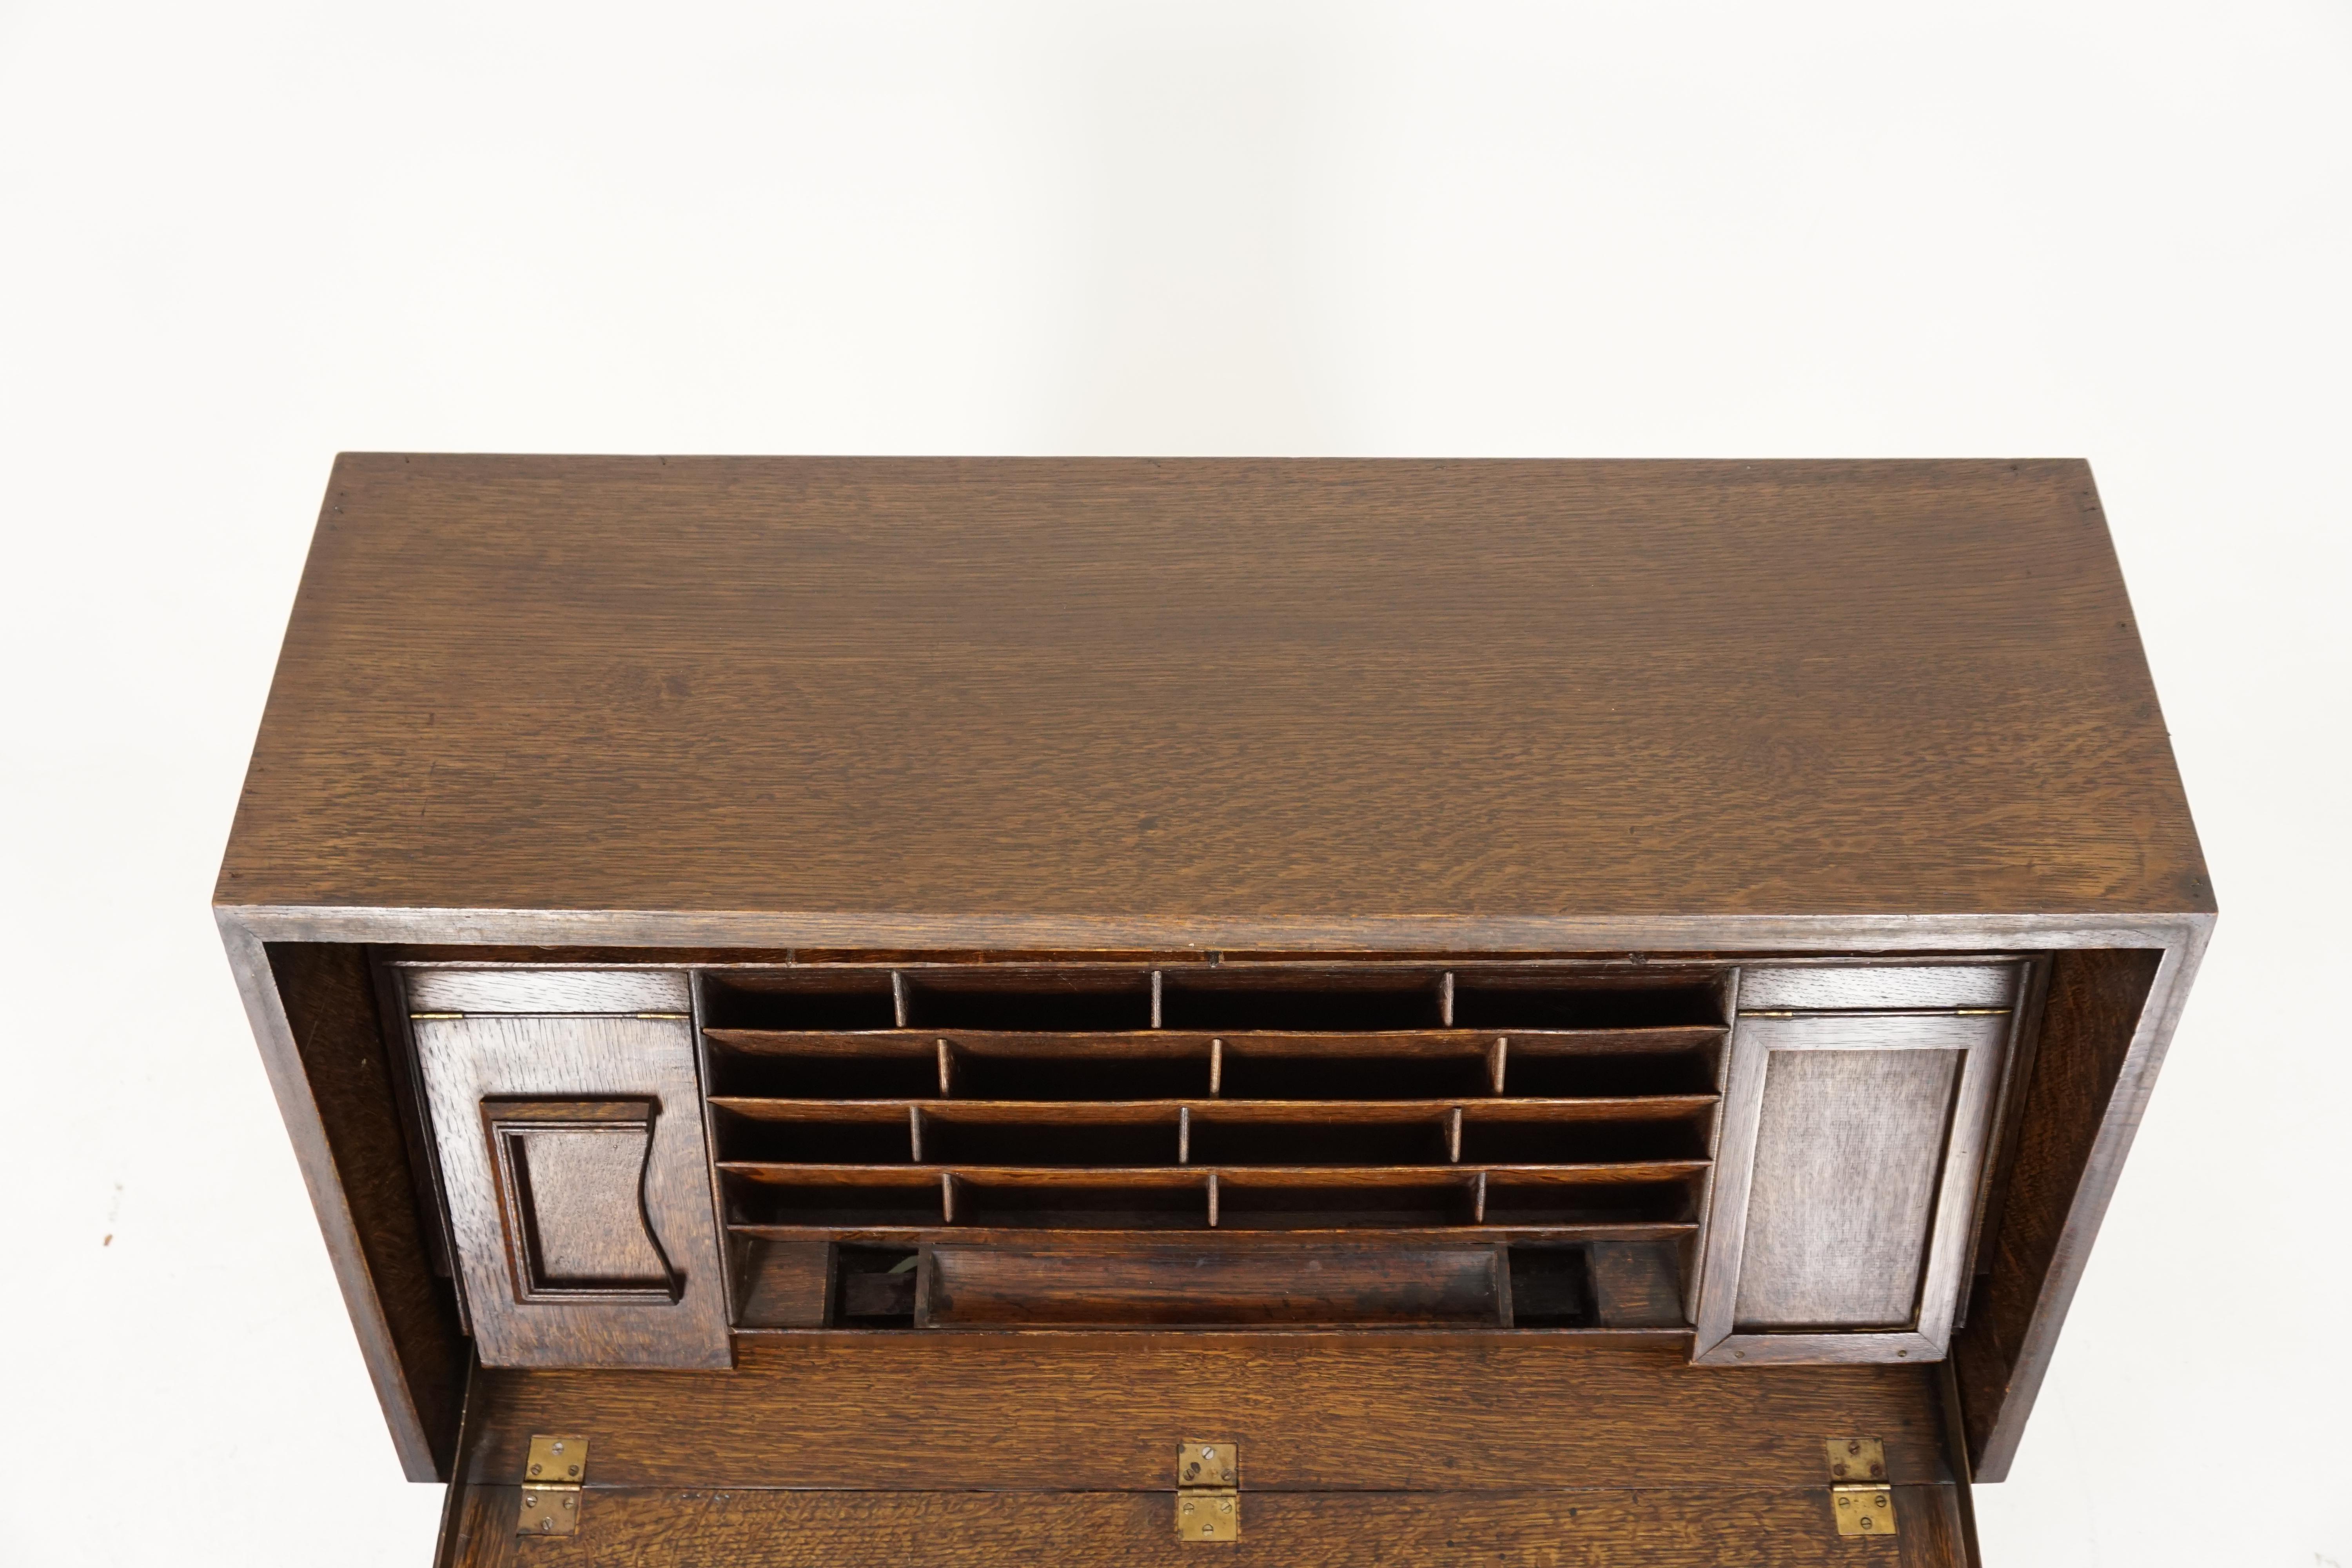 Early 20th Century Antique Oak Desk, Fall Front Desk with Fitter Interior, Scotland 1910, B1868